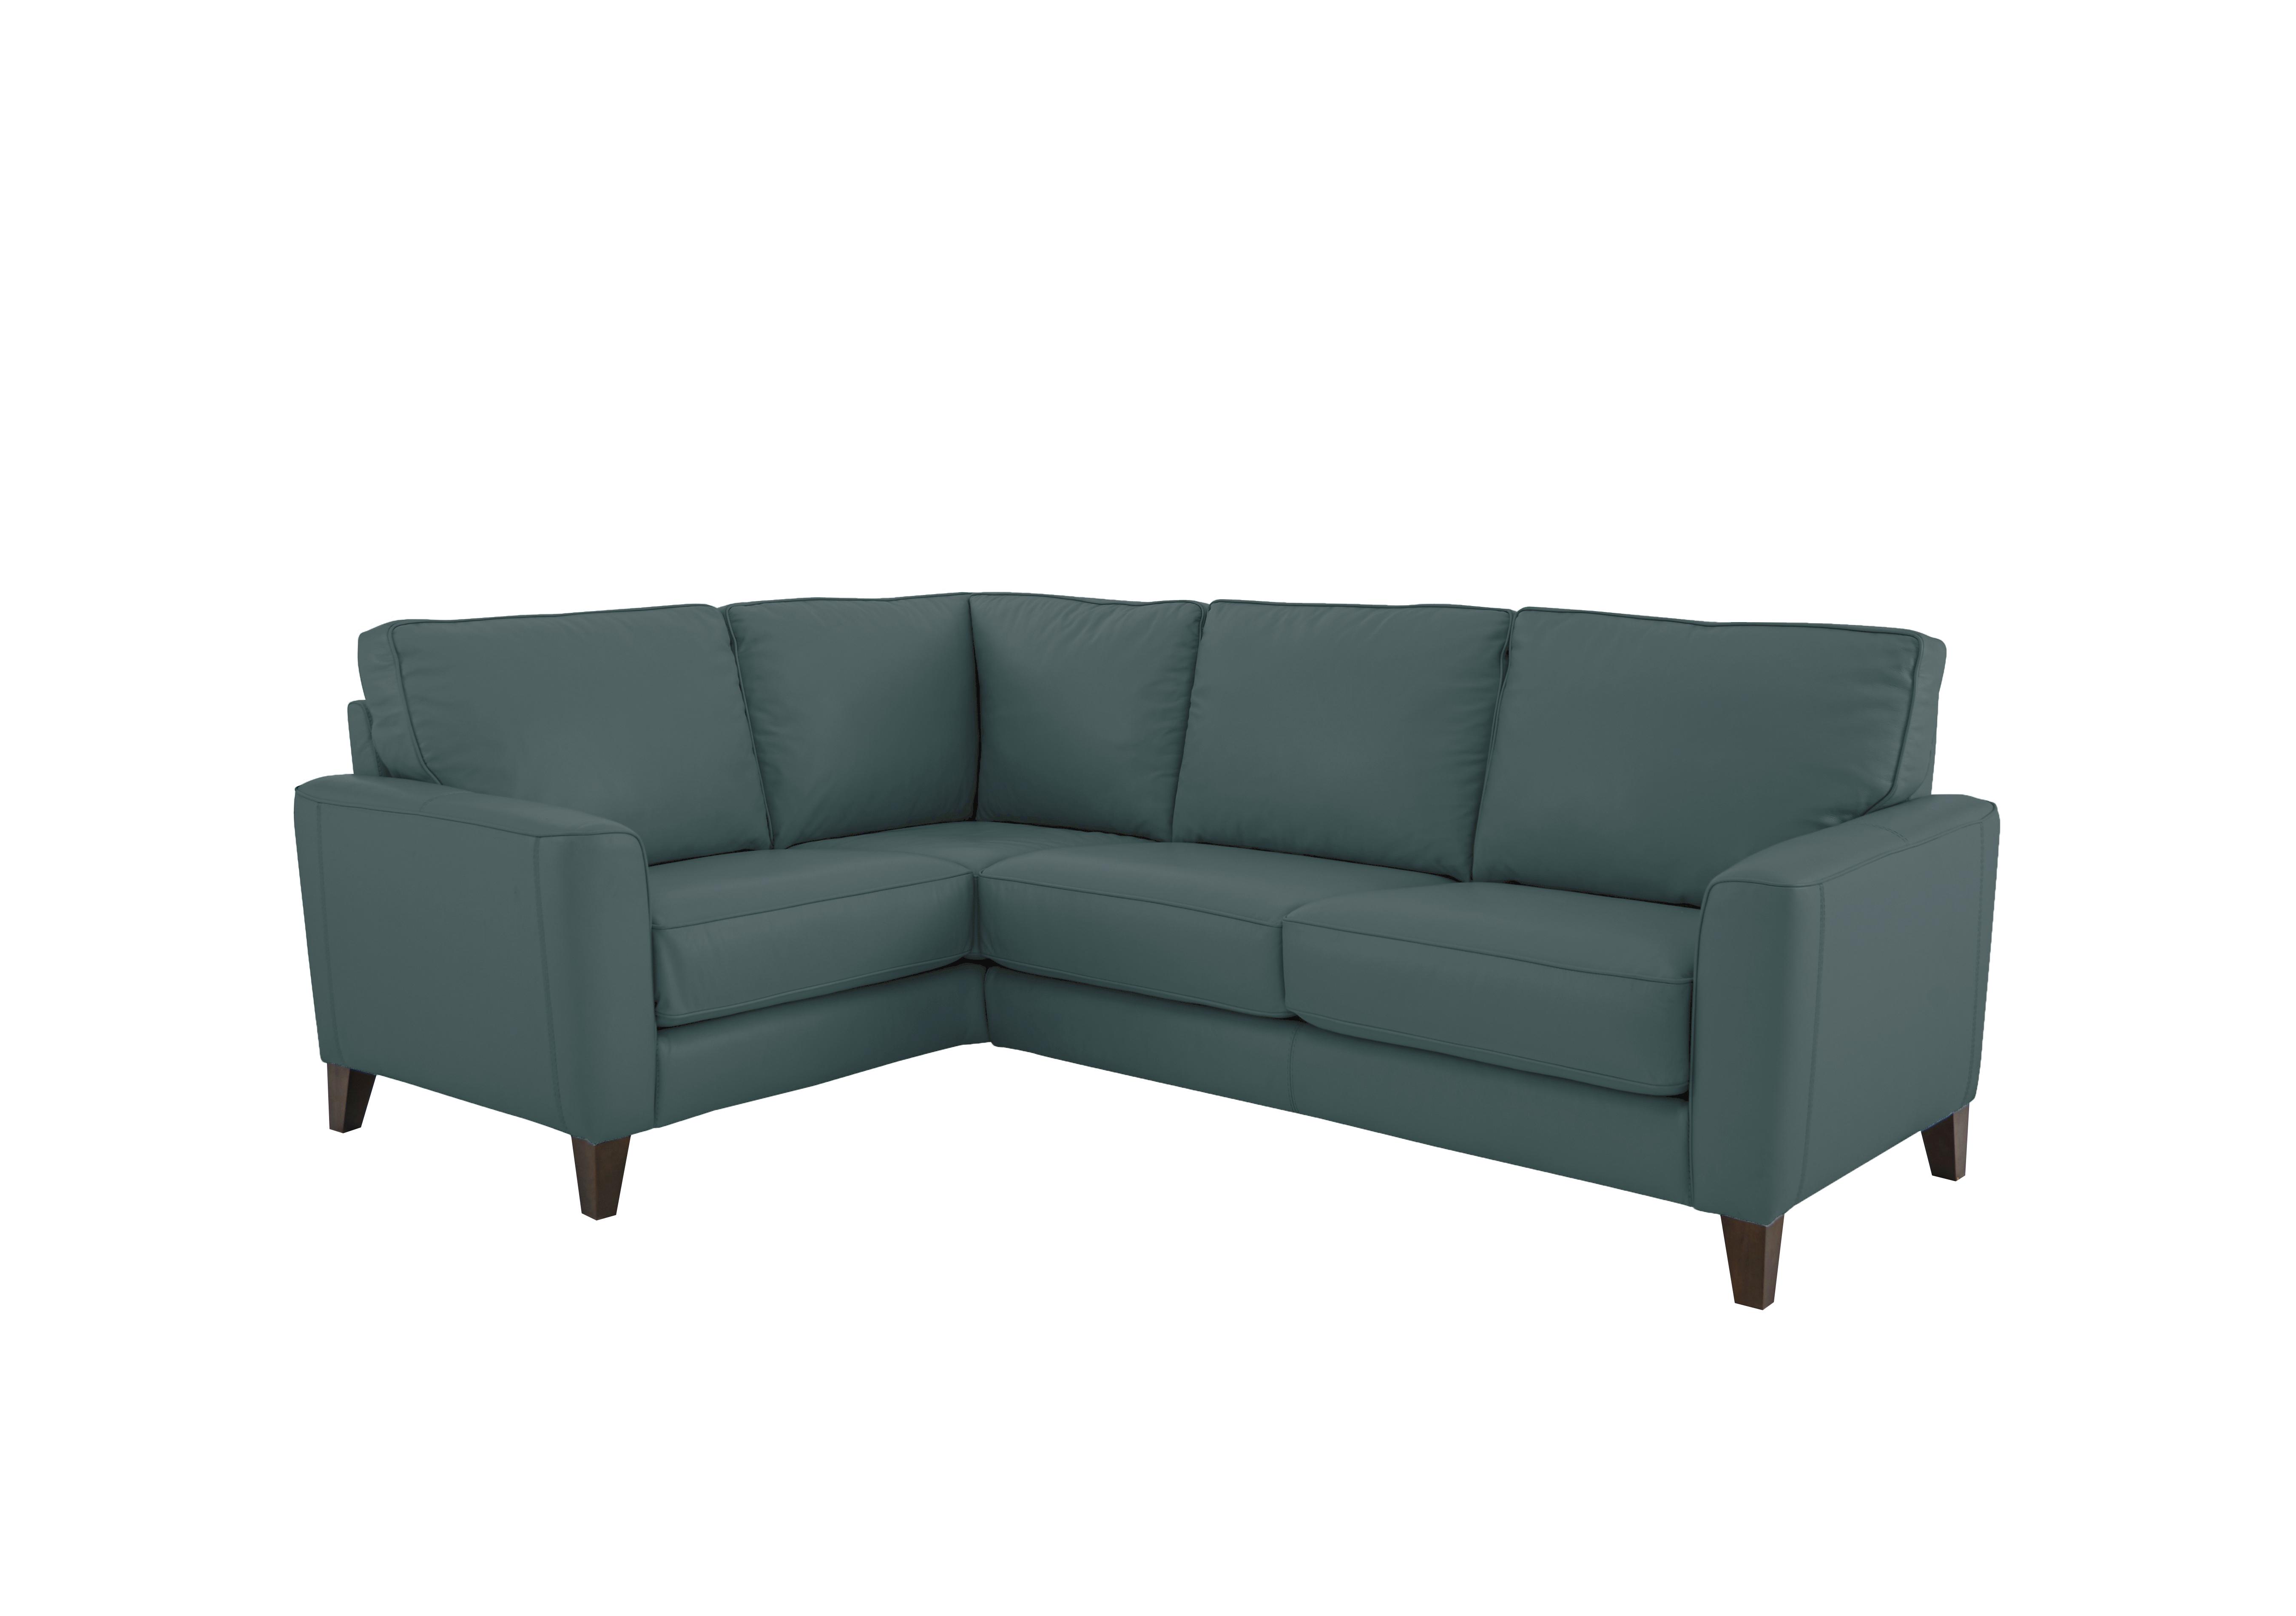 Brondby Small Leather Corner Sofa in Bv-301e Lake Green on Furniture Village